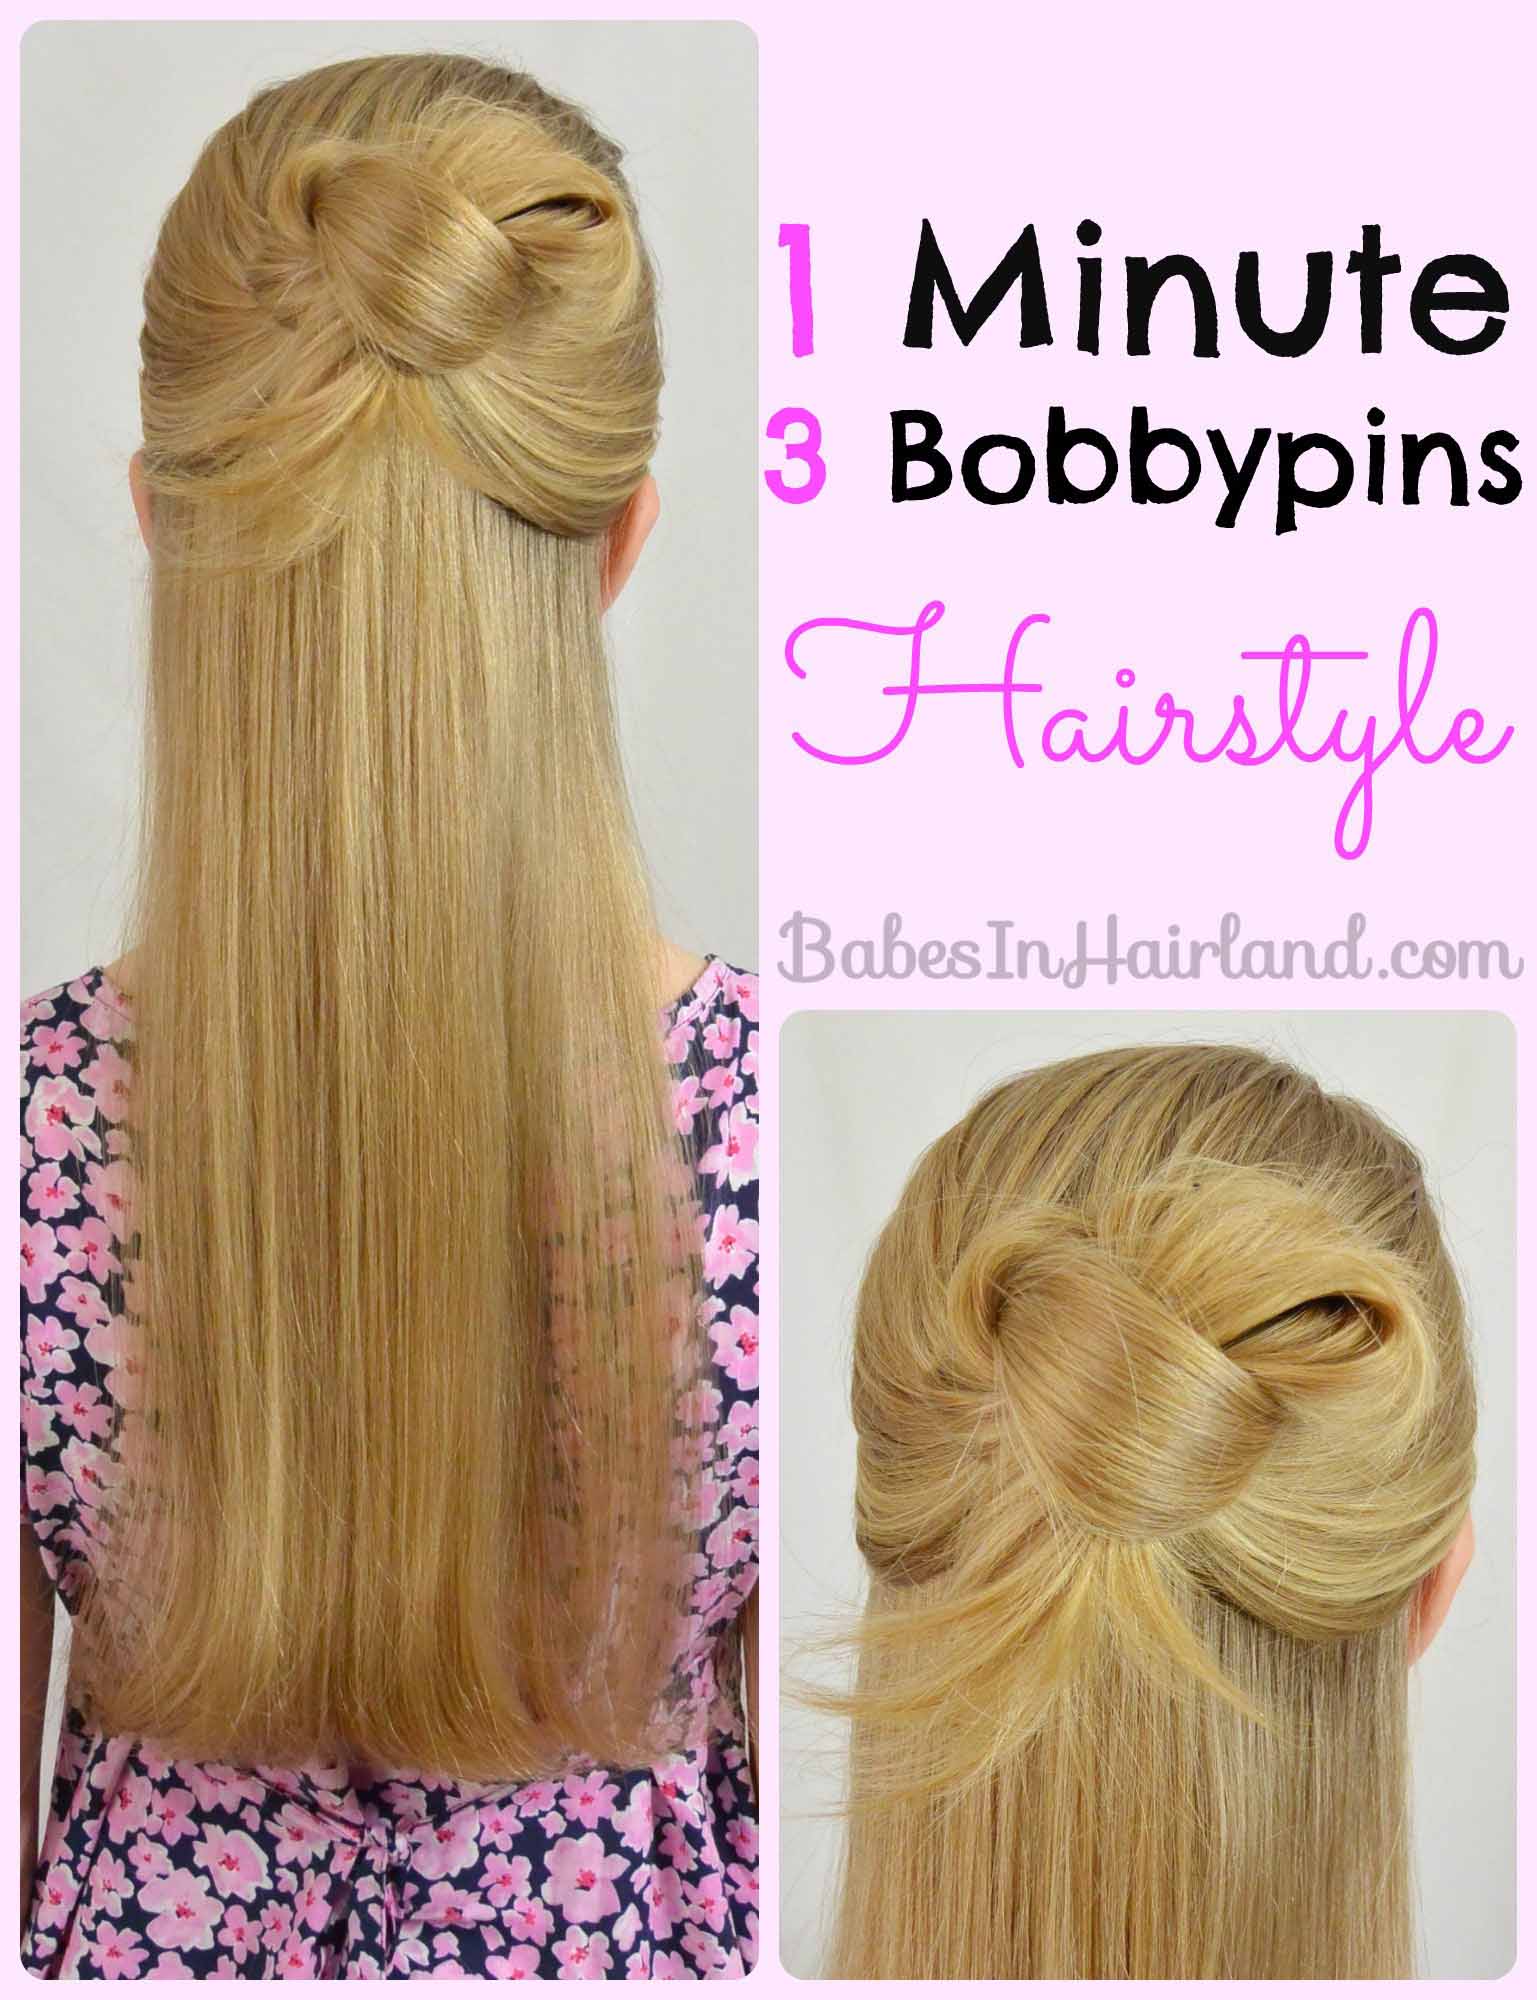 Easy 1 Minute Knotted Hairstyle - Babes In Hairland